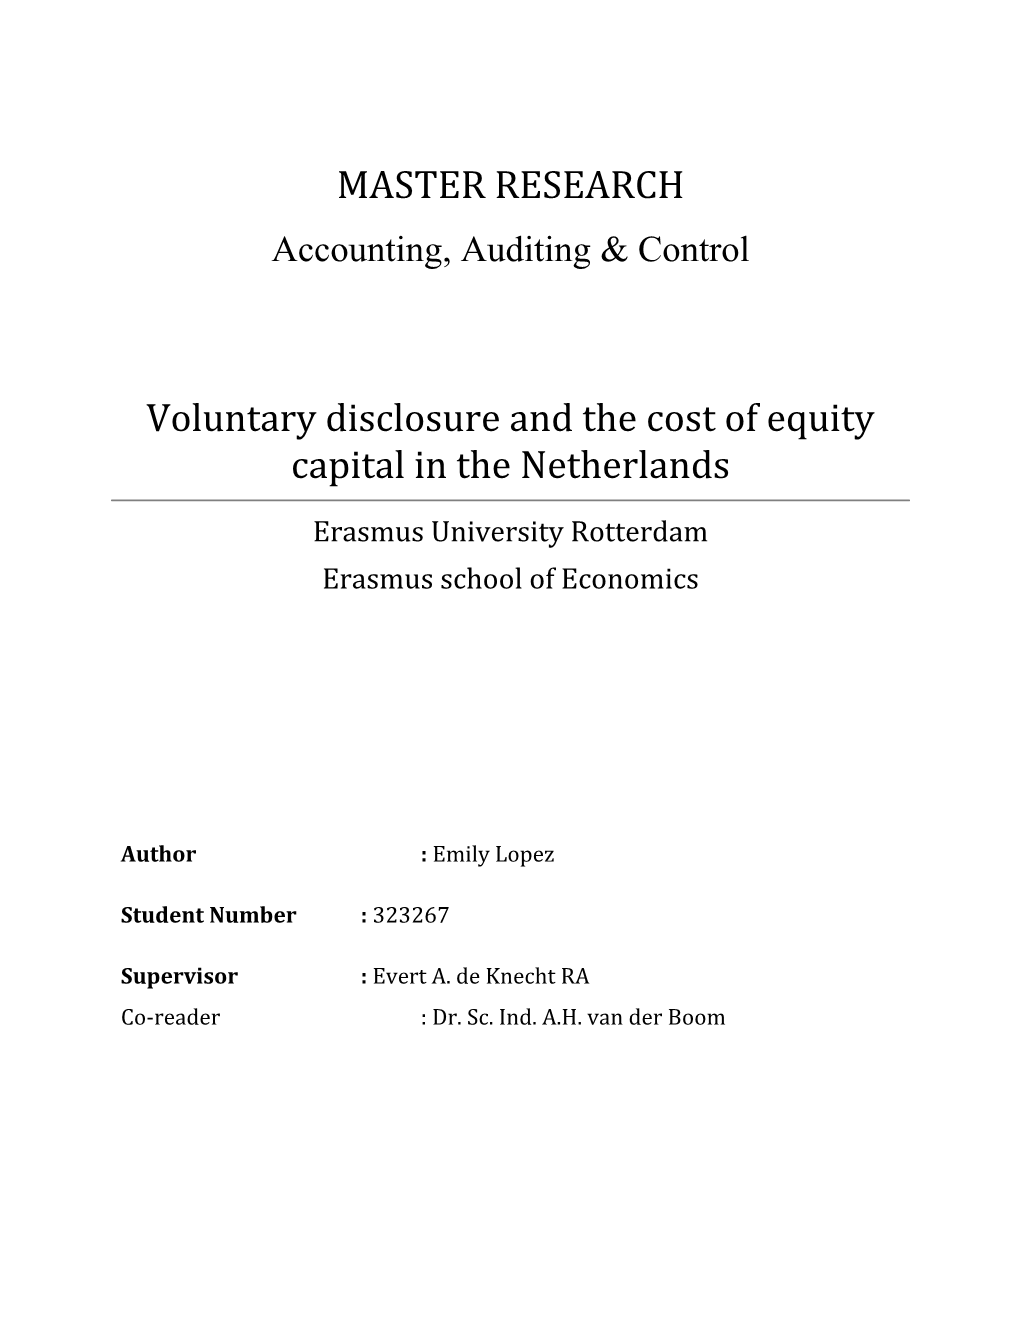 Voluntary Disclosure and the Cost of Equity Capital in the Netherlands